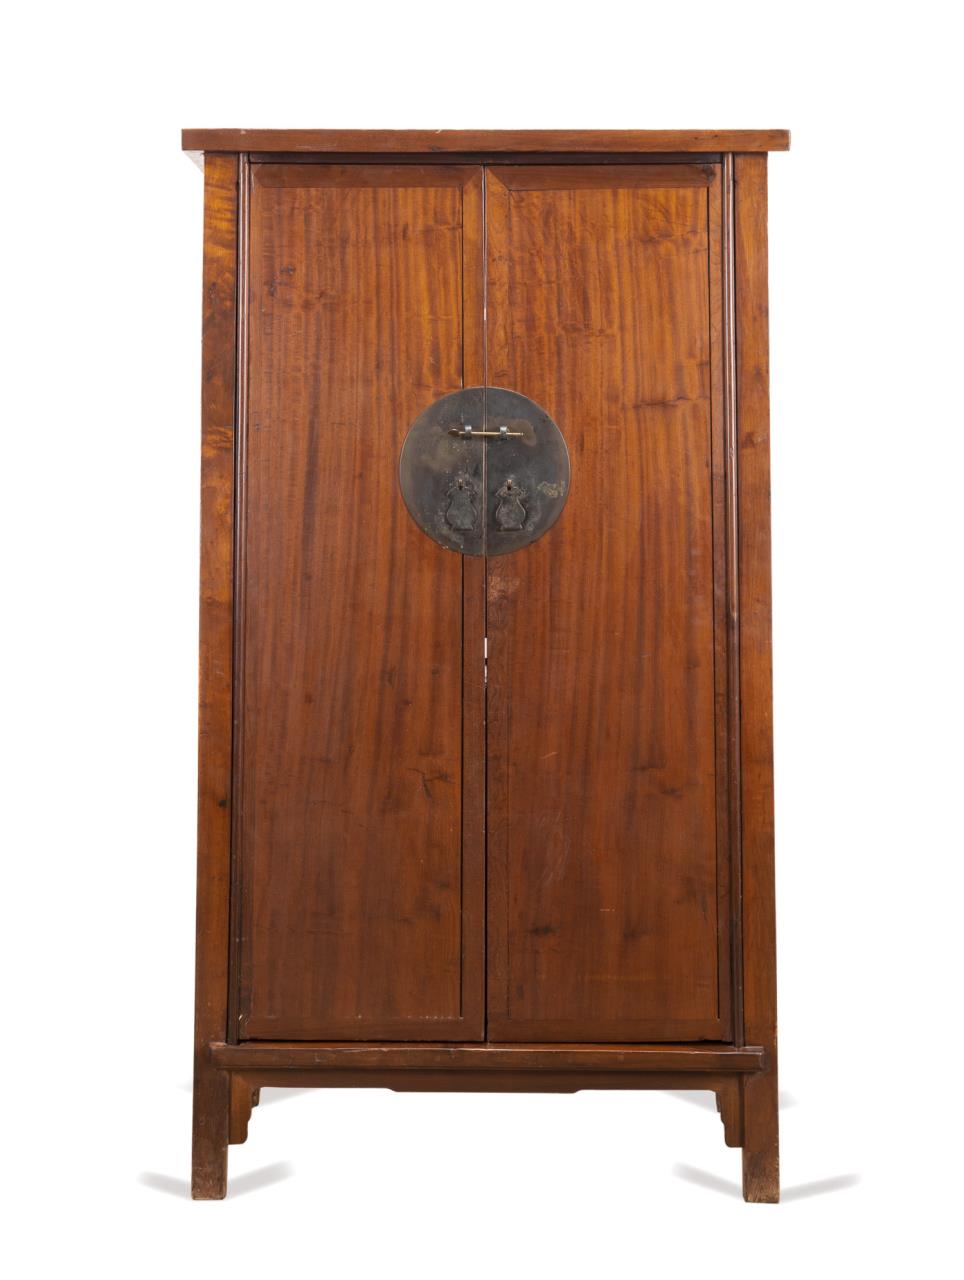 LARGE CHINESE DOUBLE DOOR CABINET 2fa2d4